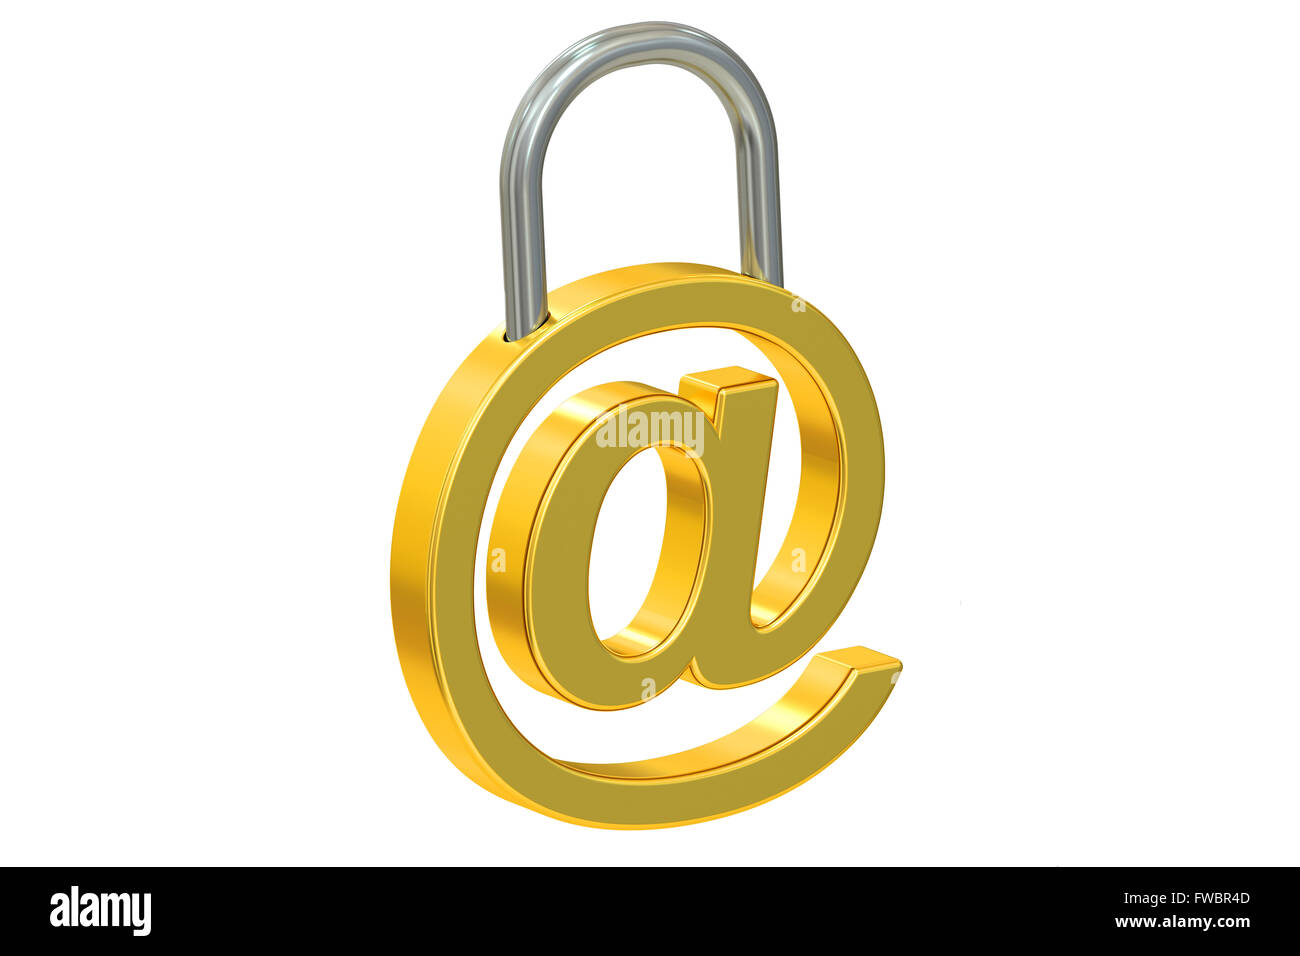 E-mail protection concept, 3D rendering Stock Photo